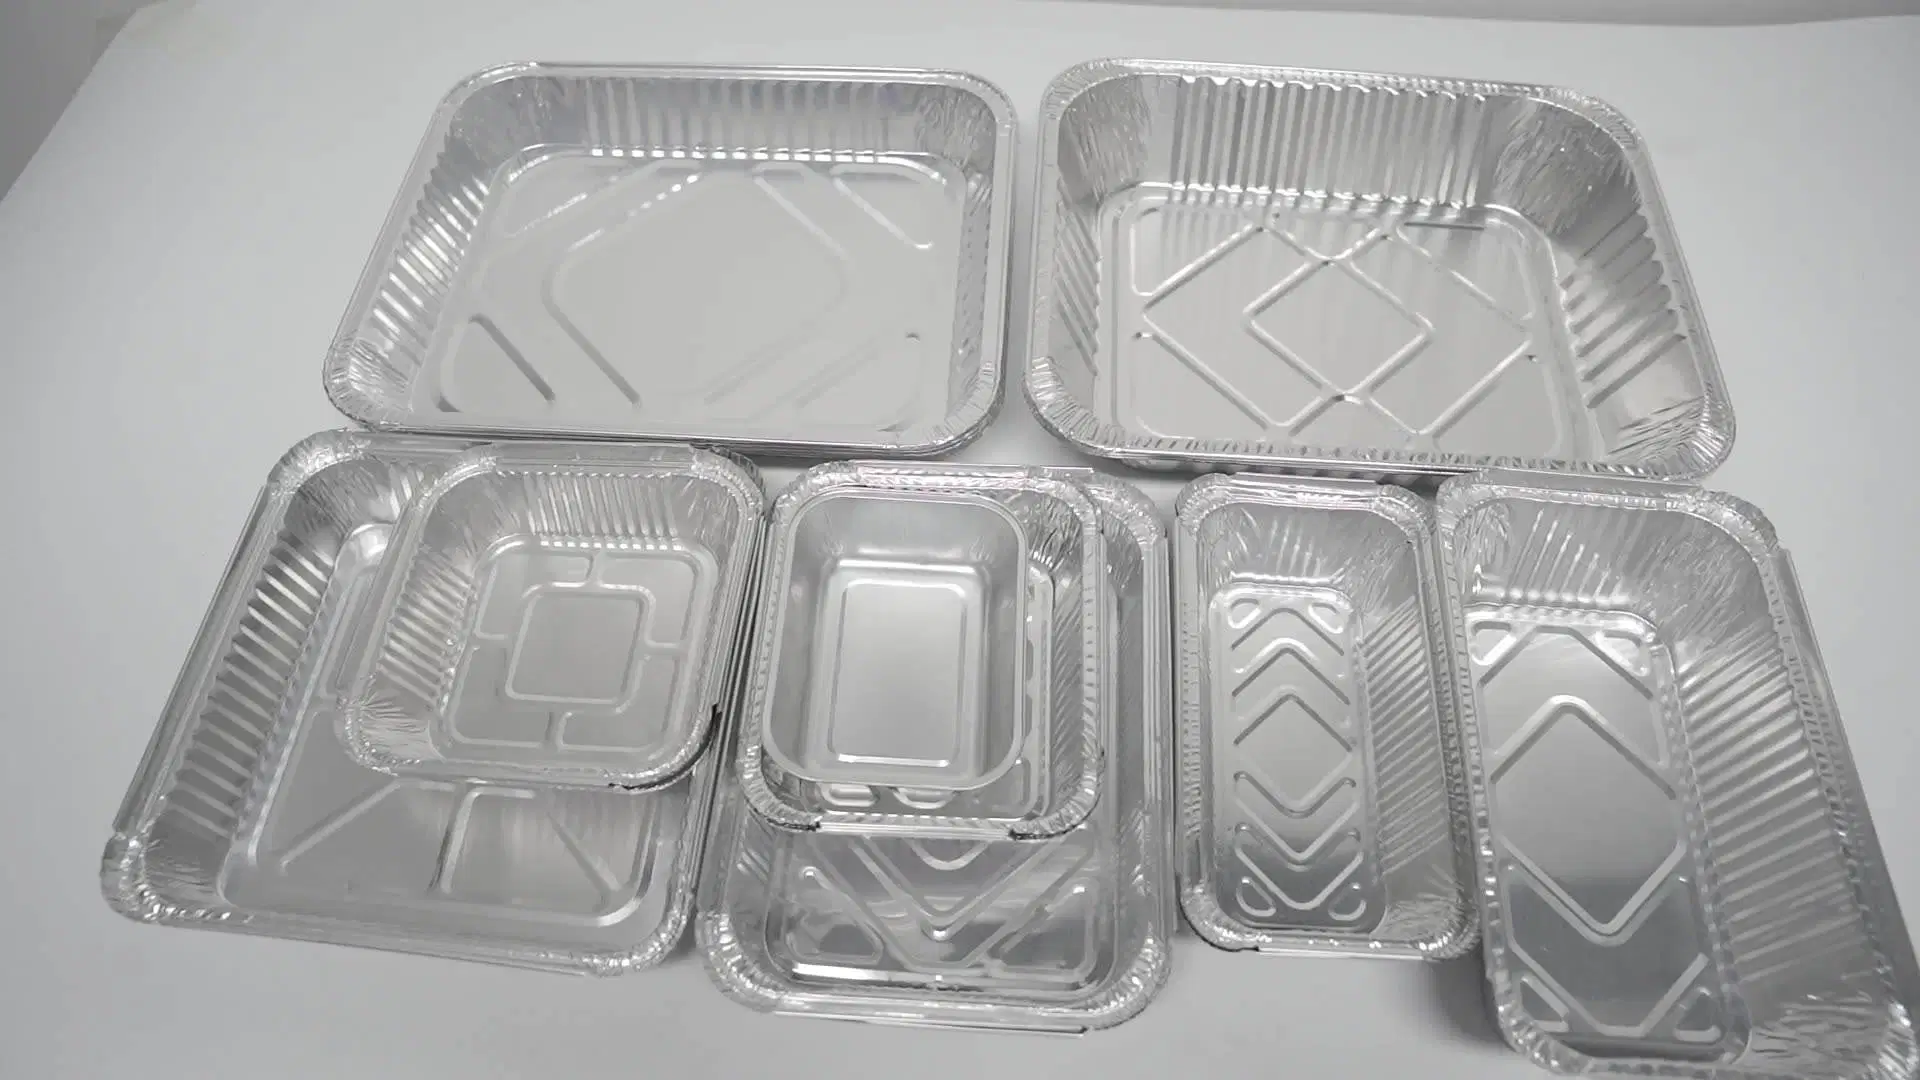 9X13 Half Size Aluminium Foil Pans/Trays with Lids 10pack 20pack 50pack Disposable Rectangle Aluminum Foil Food Containers